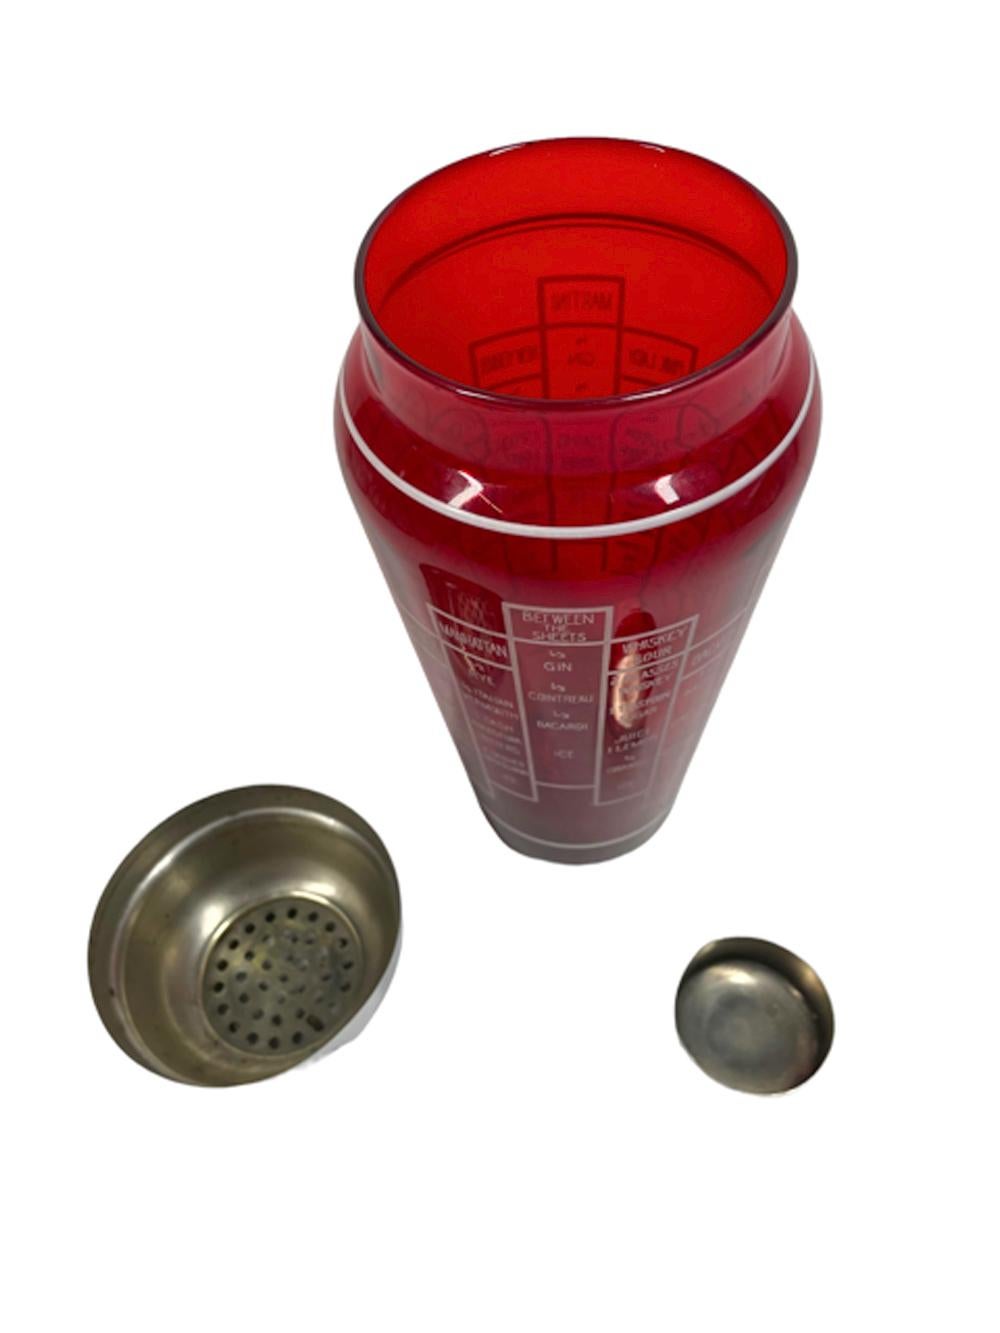 Art Deco ruby glass cocktail shaker of tapered shouldered form with 2-part chrome domed lid with integral strainer. The exterior of the shaker with white graphics having vertical stacks of blocks with recipes for 16 cocktails.